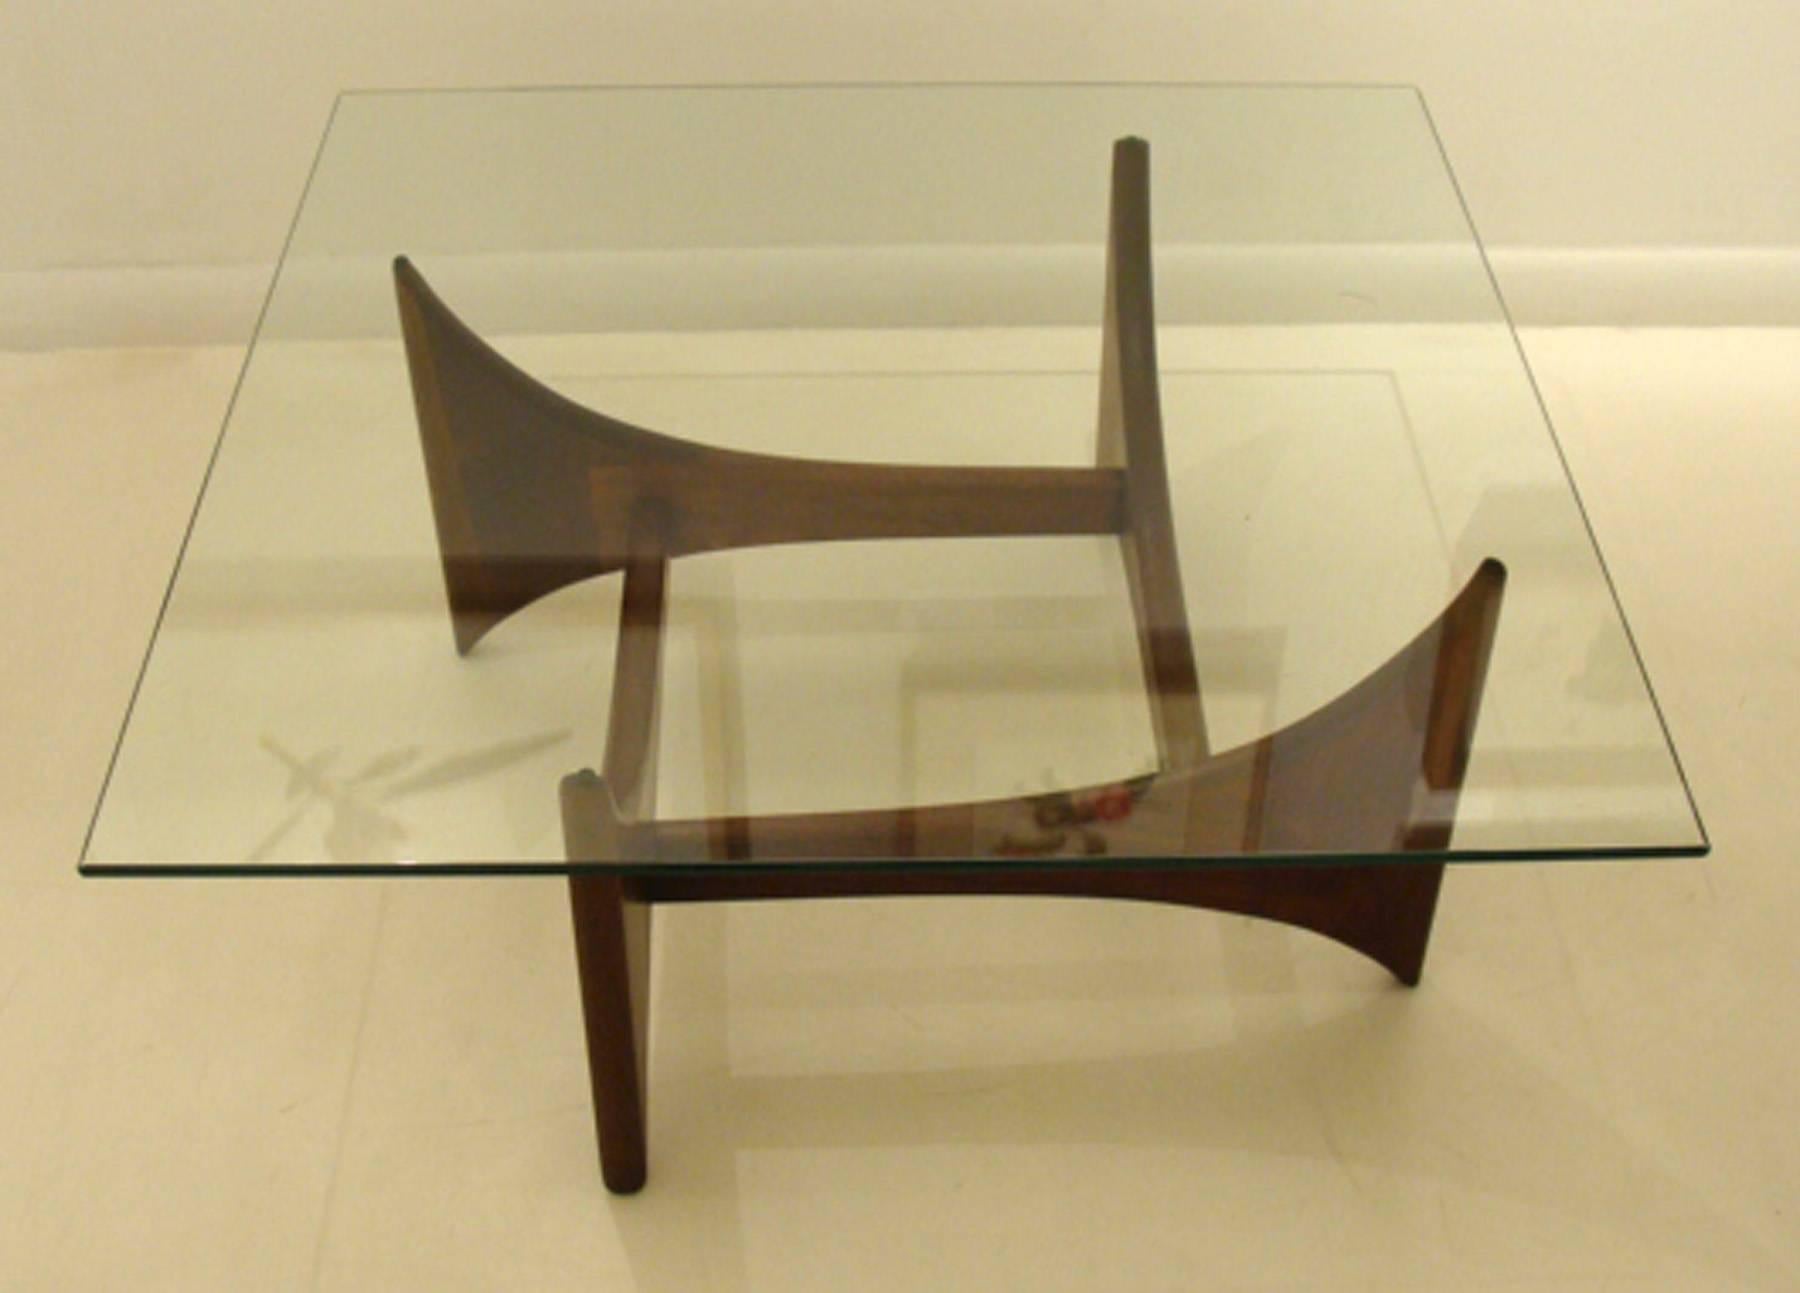 Pearsall sculptural coffee table in walnut with square glass top.